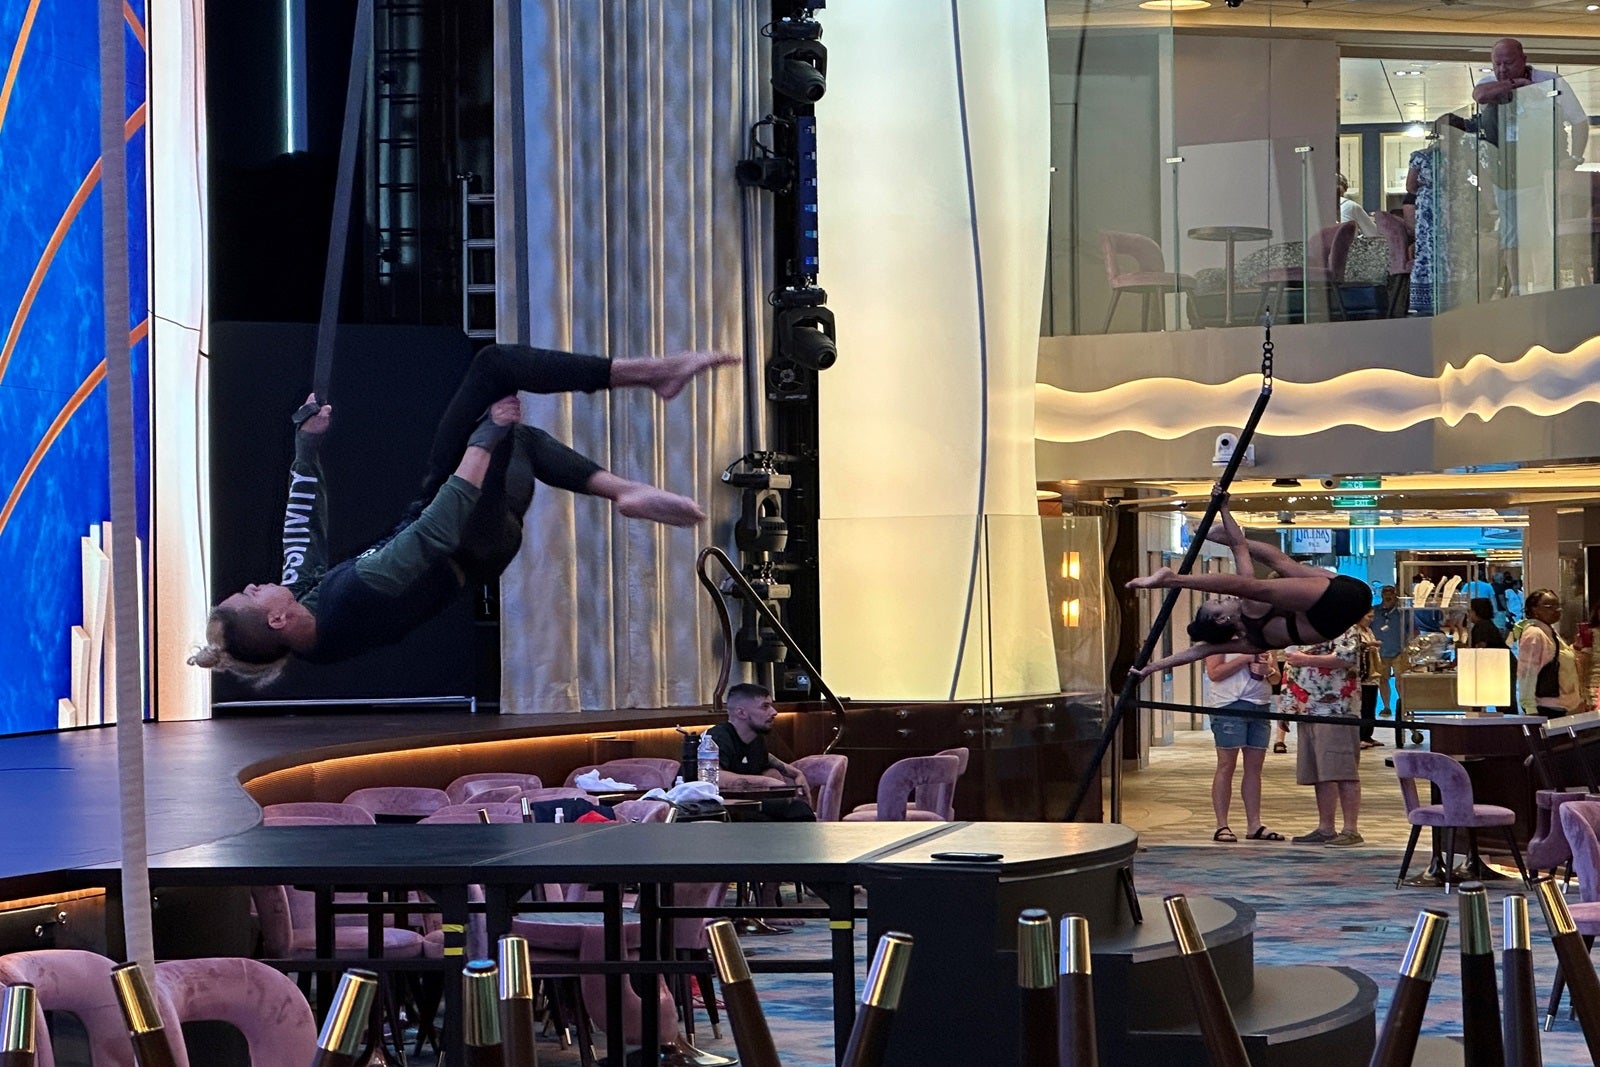 A stage area with acrobats rehearsing while hanging in the air